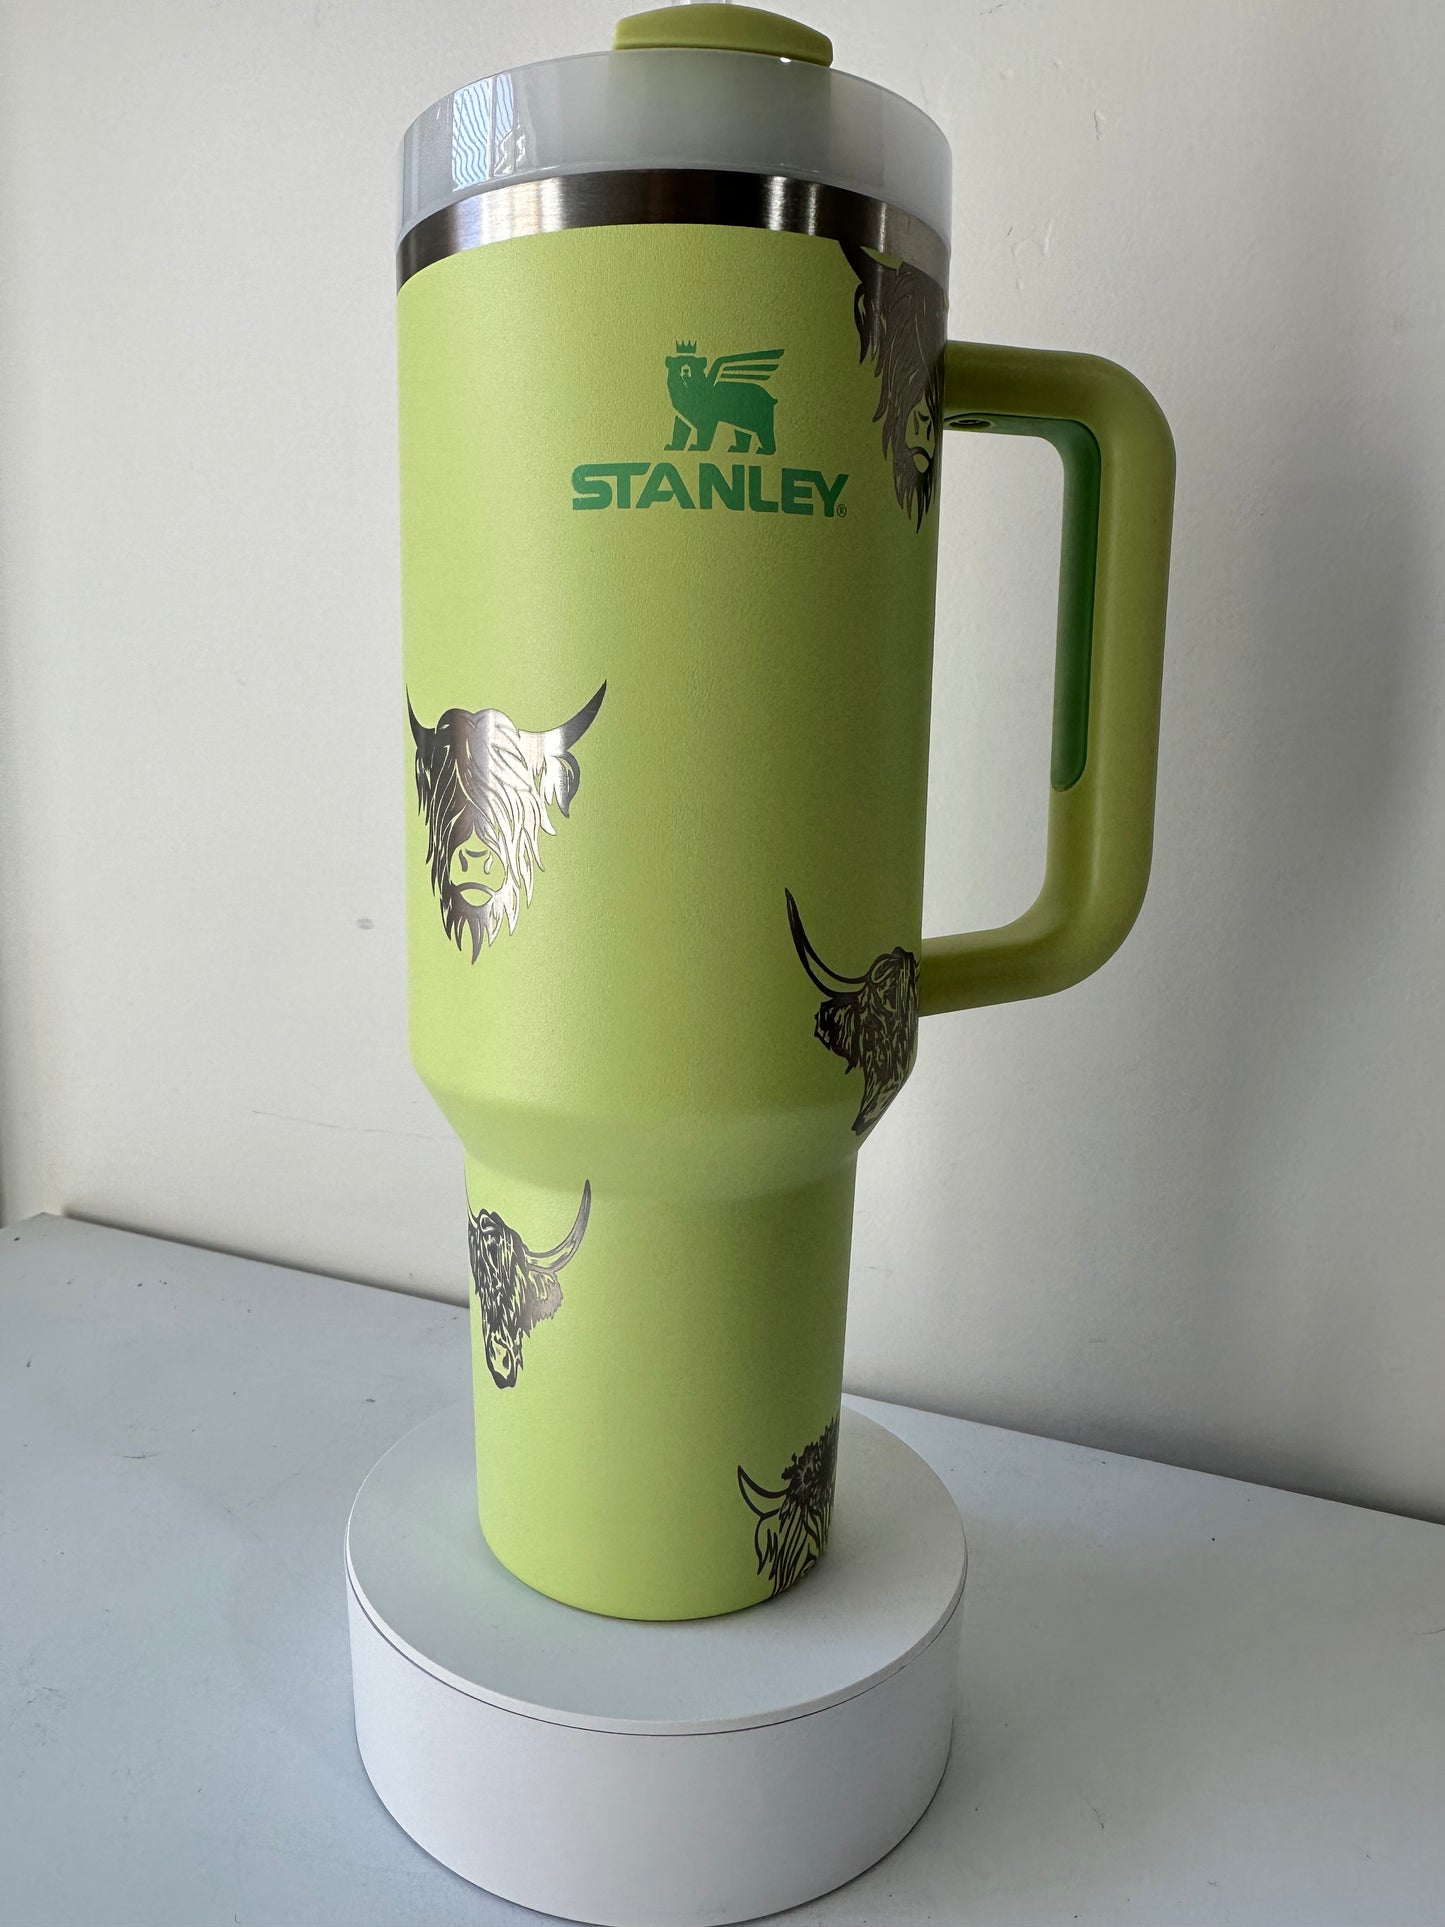 Promotional Stanley Quencher Flowstate Tumbler 40 oz